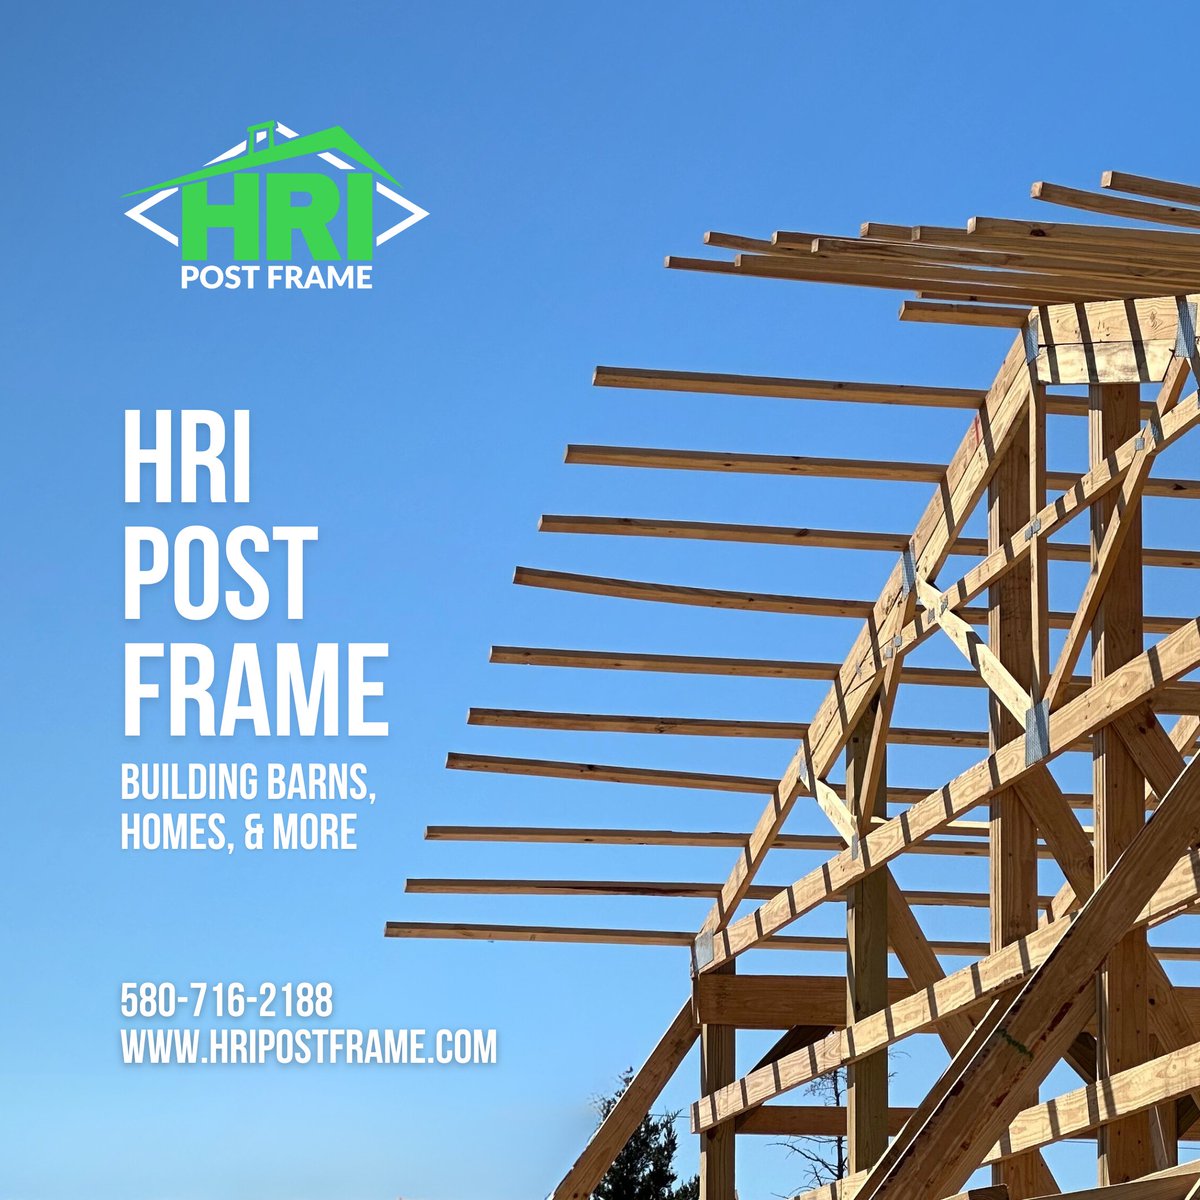 Invest in quality post-frame structures that are built to last! 🛡️ We build durable post-frame structures for agricultural, commercial, and residential uses. Contact us today for a consultation in Oklahoma or Kansas. 💪🌟 #postframeconstruction #HRIPostFrame #OklahomaBuilder